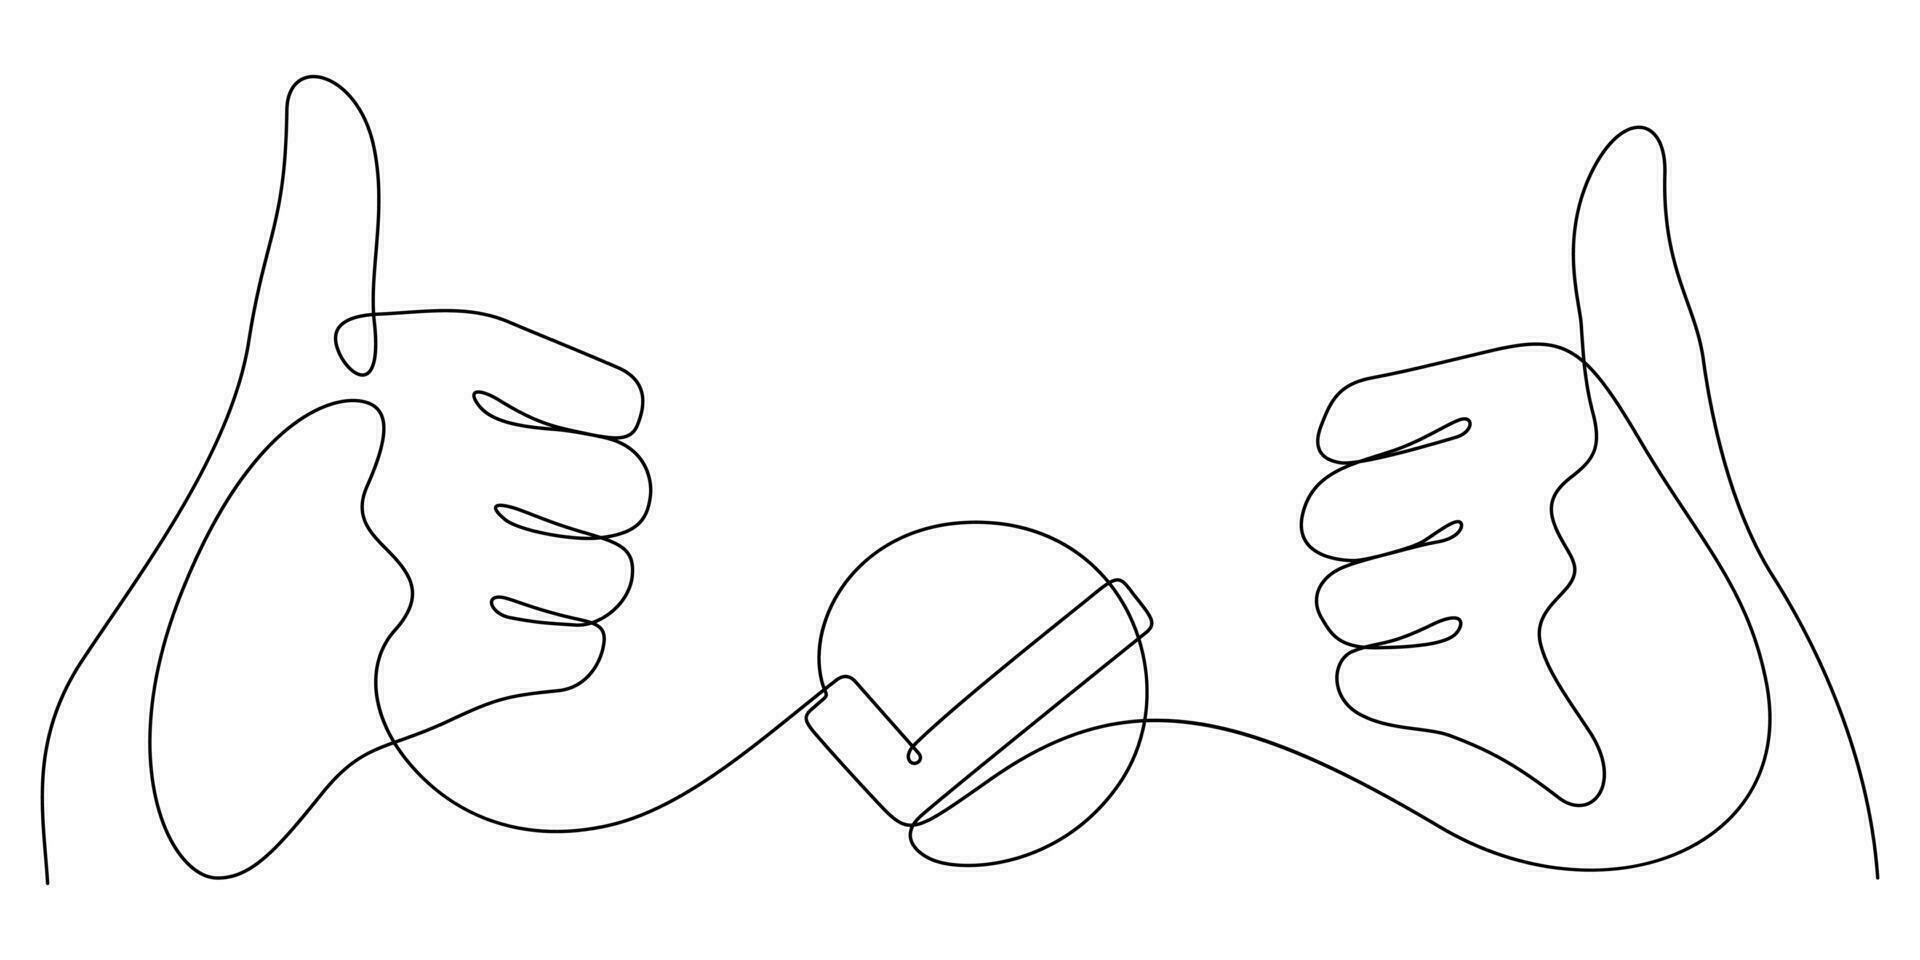 thumbs up in continuous line drawing with check mark sign minimalism vector